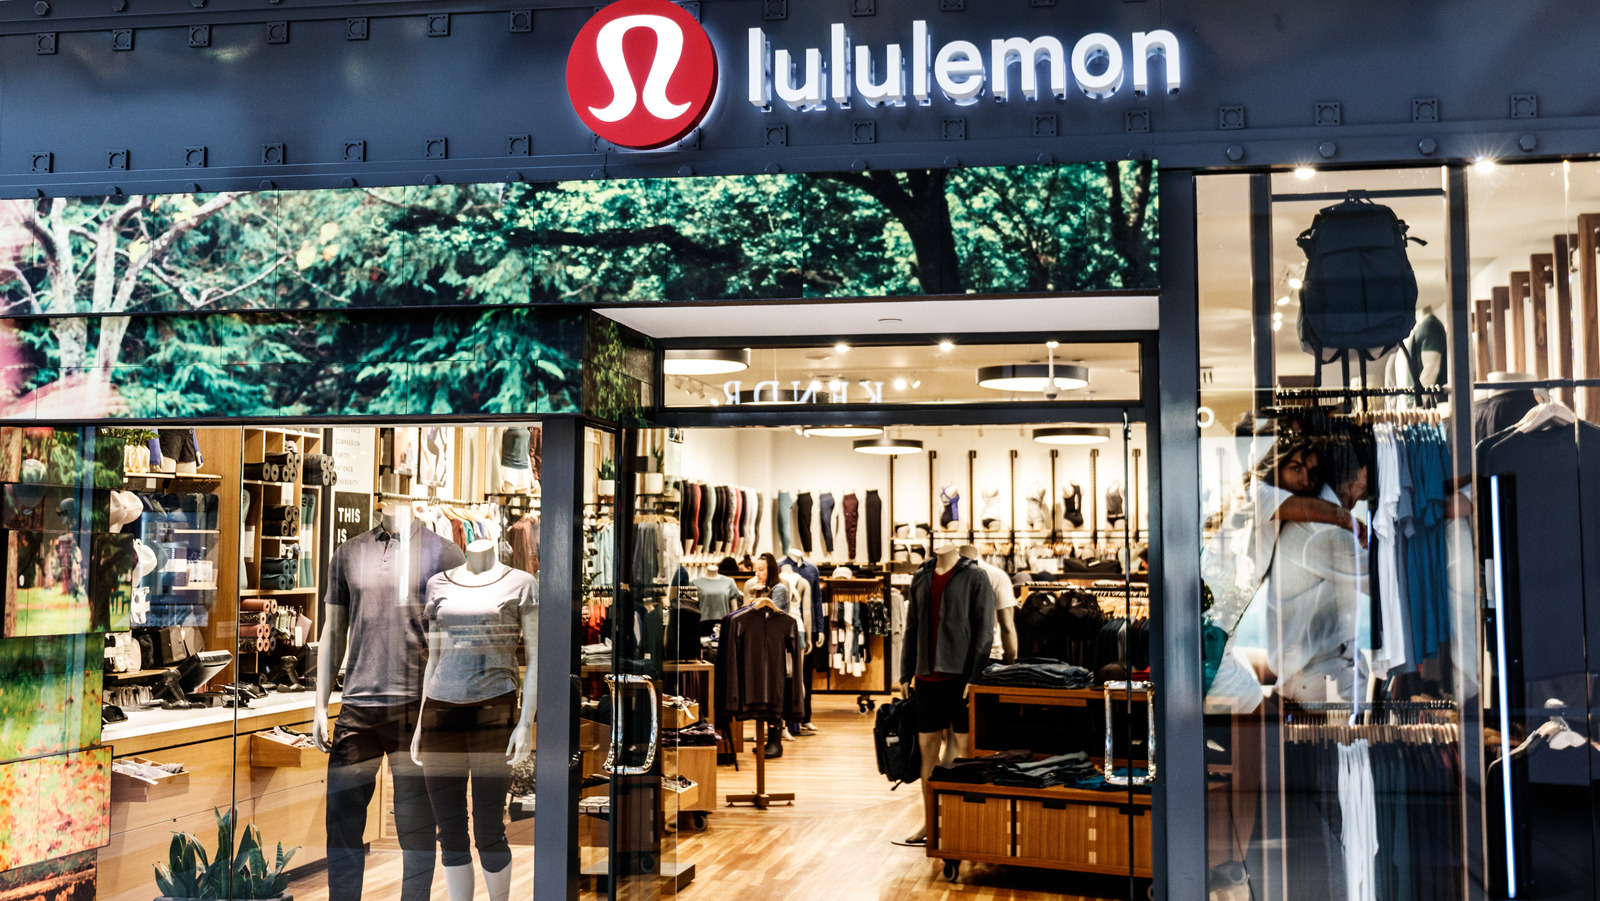 According to TikTok, This Lululemon Jacket Gives Your Body a BBL